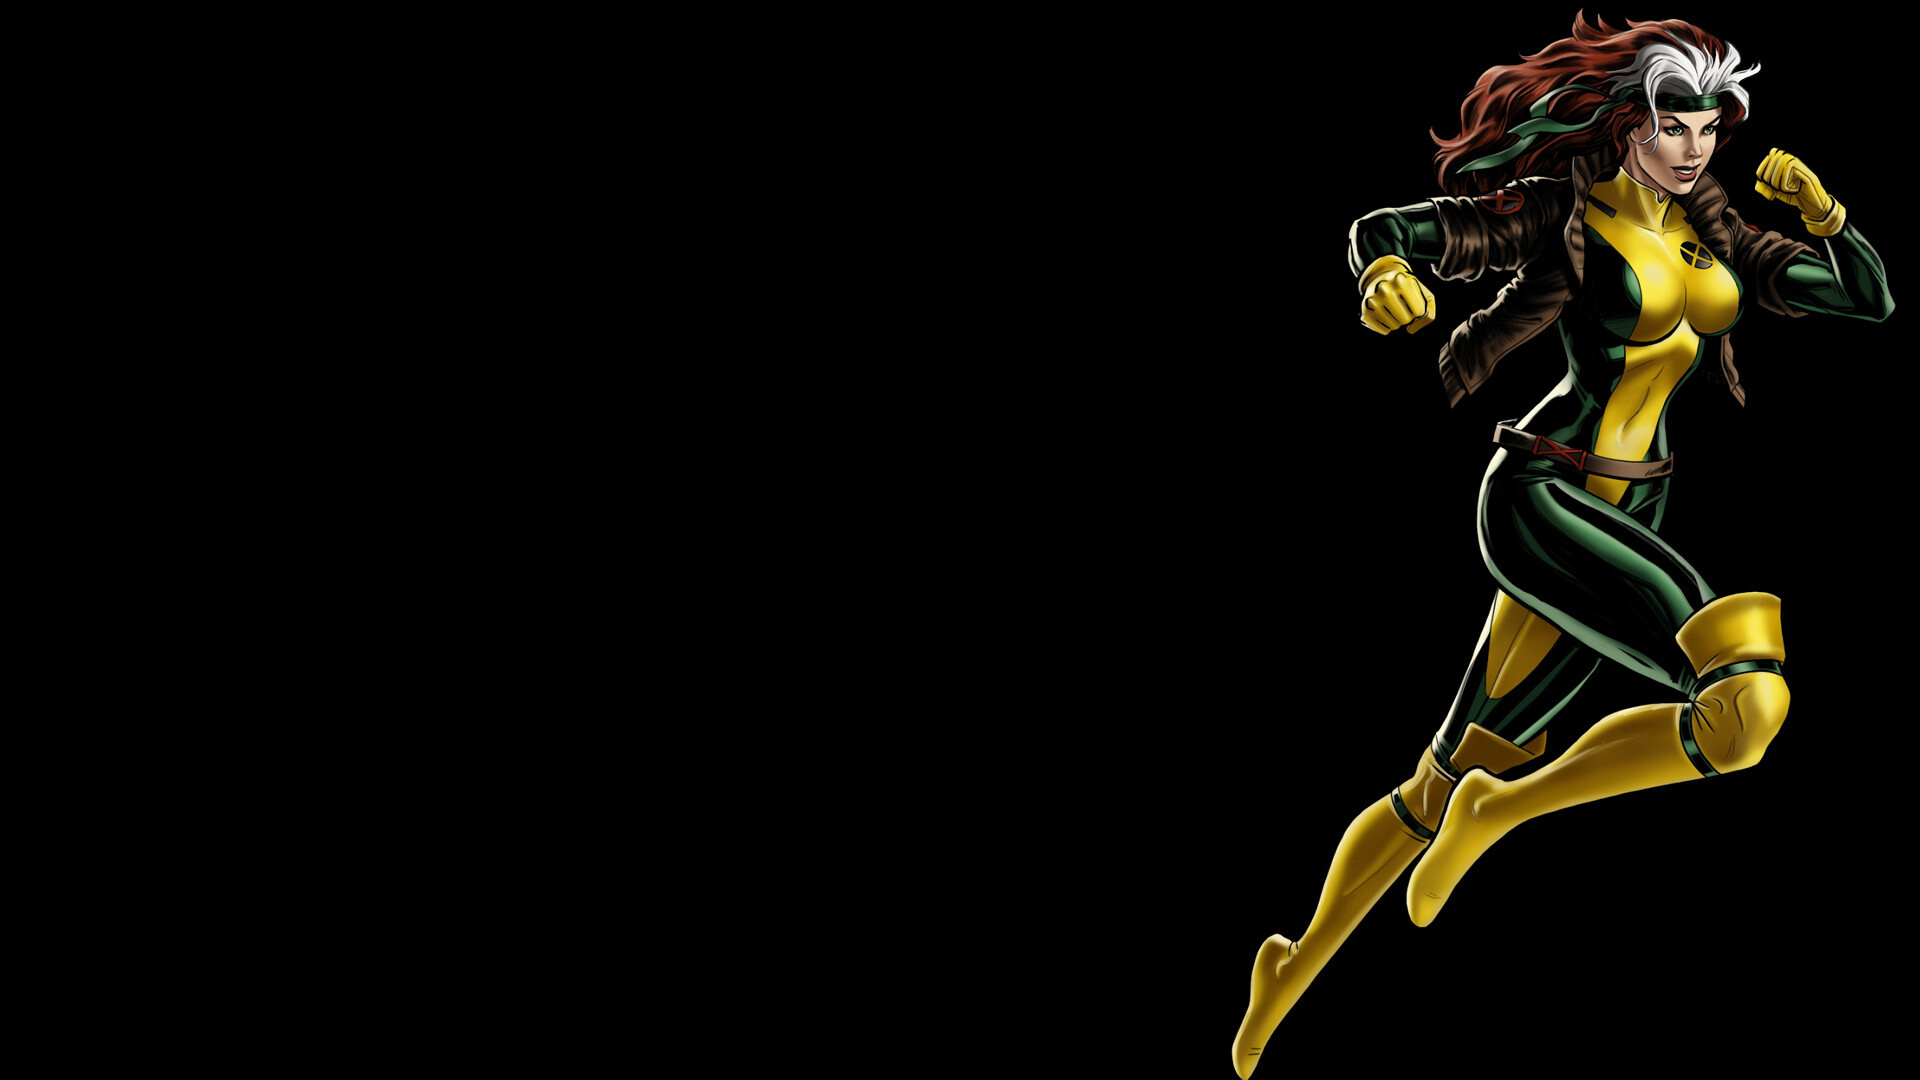 Rogue (Marvel): Marvel, Has the uncontrollable ability of absorbing the energy of others through physical contact. 1920x1080 Full HD Background.